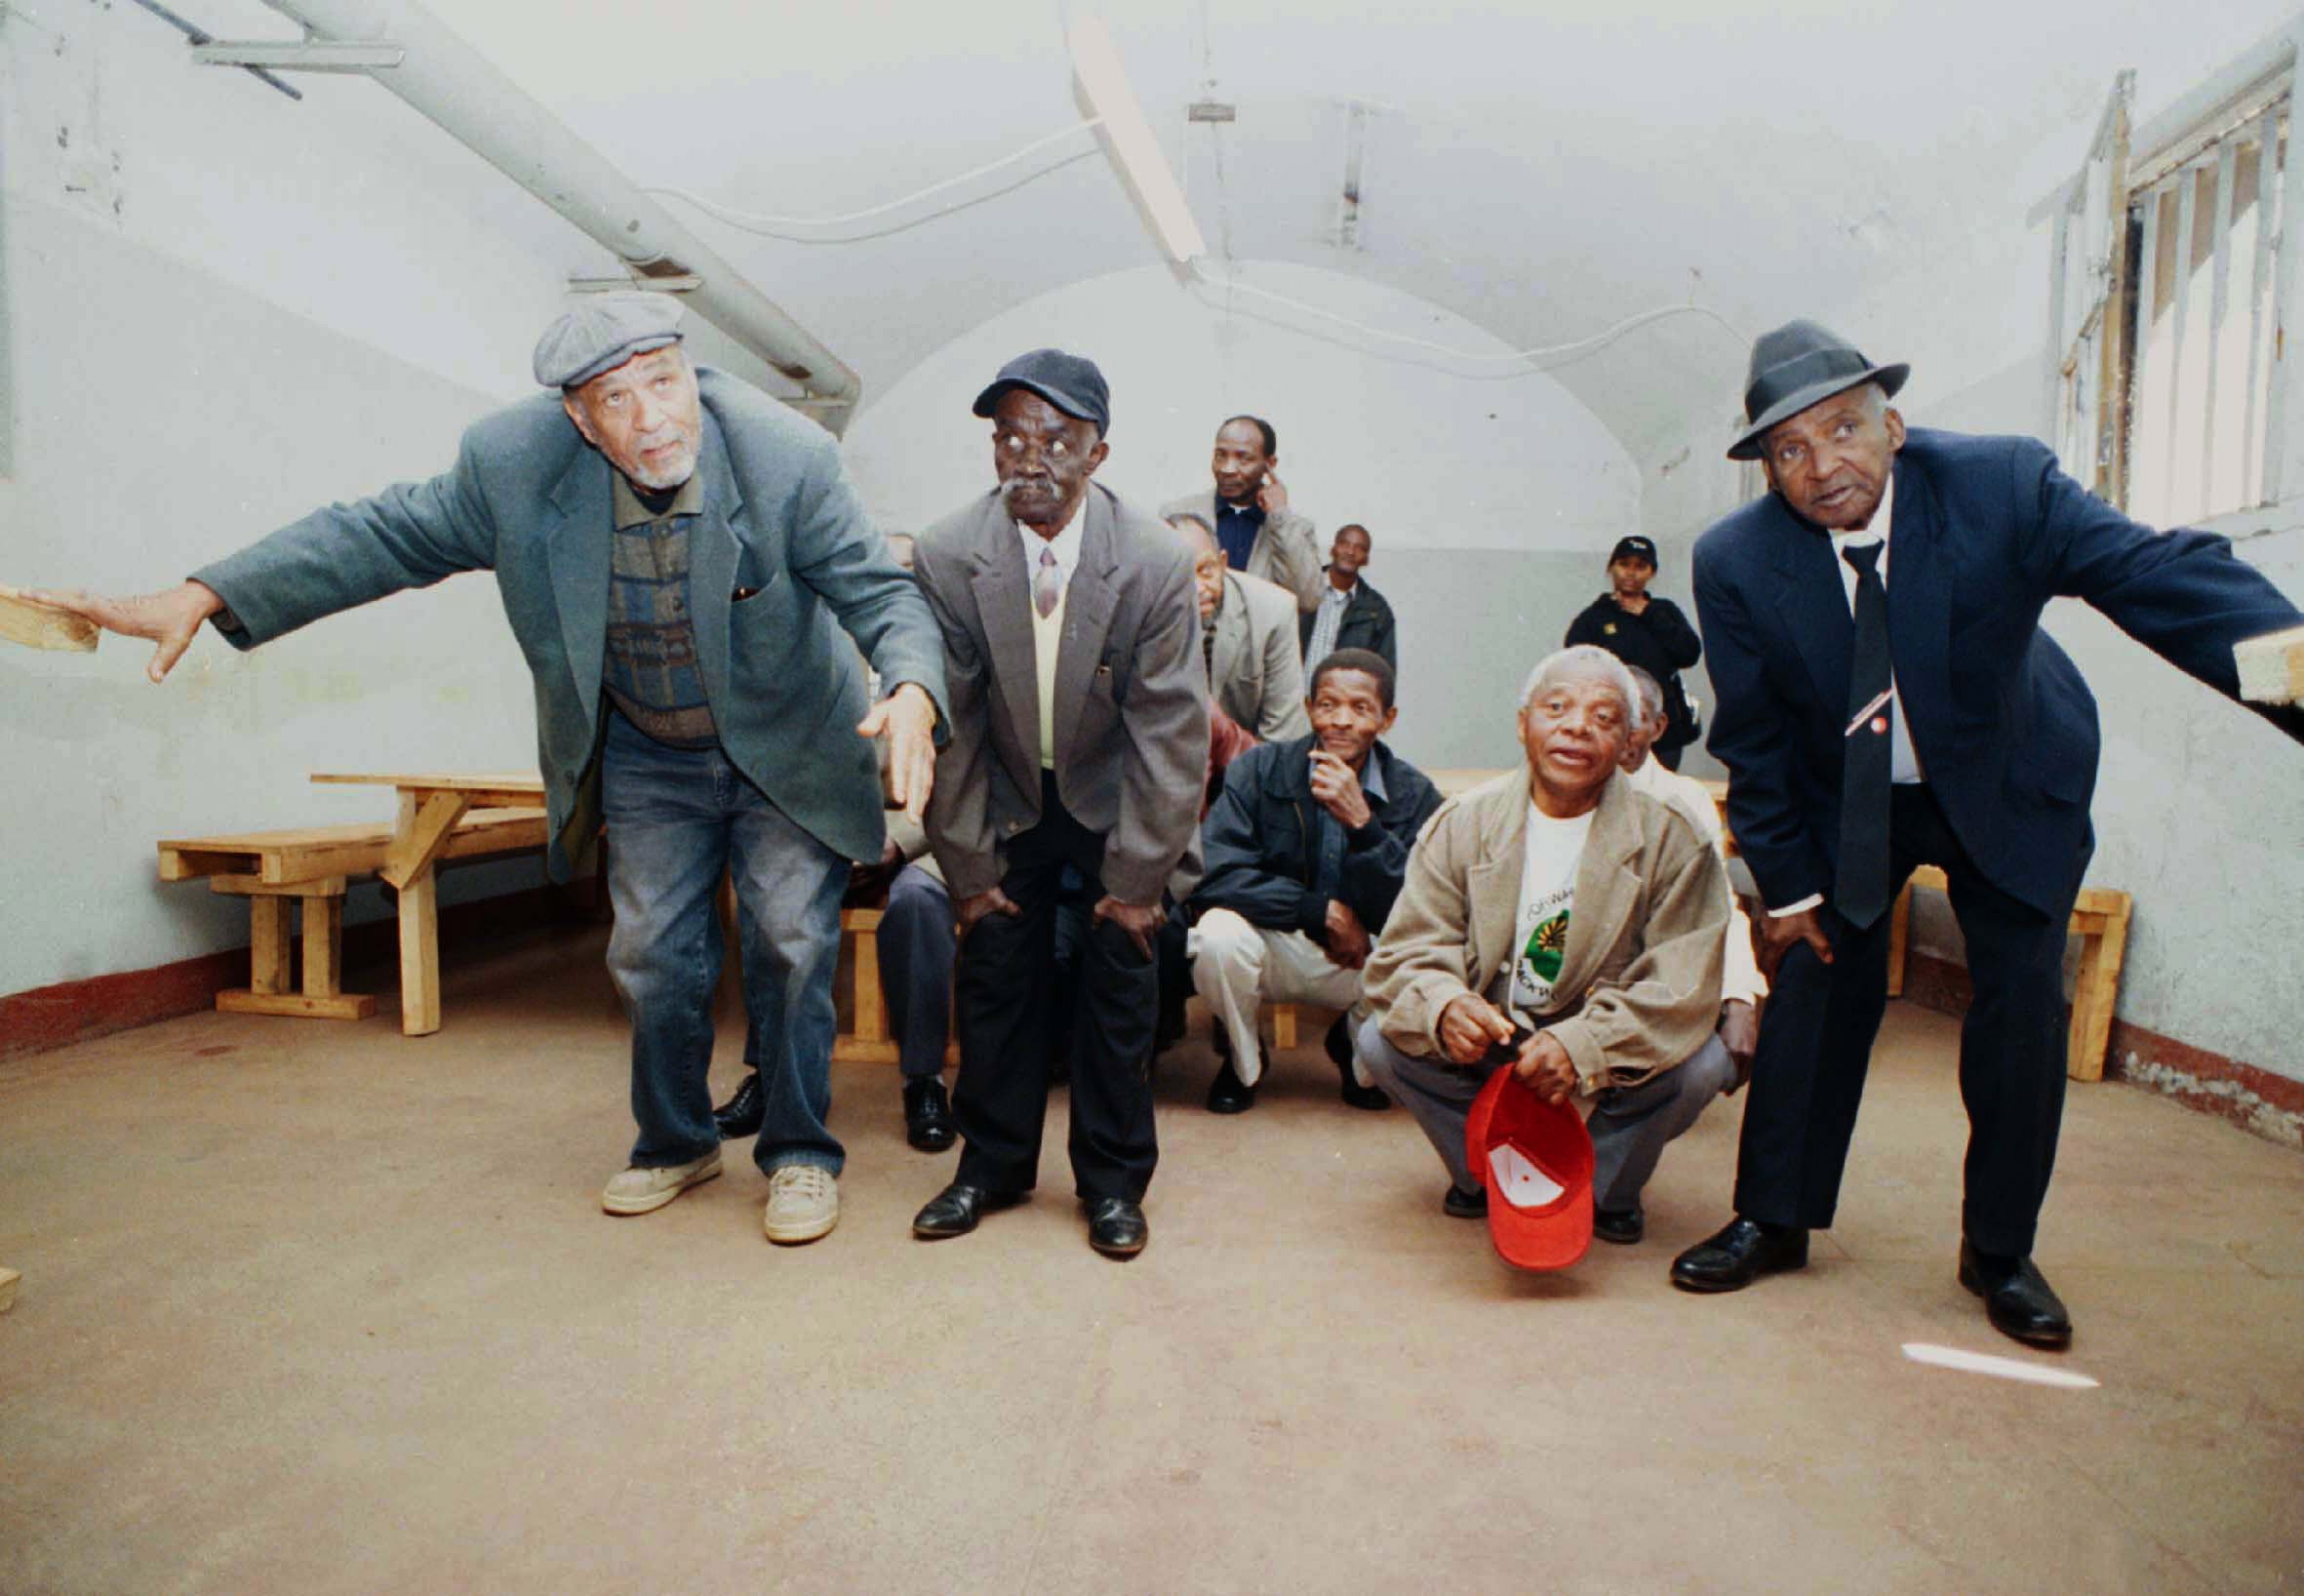 Ex-prisoners of the Number Four prison, and members of the PAC during the 1960's, at the PAC Ex-Political Prisoners Workshop held at The Old Fort, Johannesburg, 23 August 2003. The workshop was facilitated by Heritage, Education and Tourism team members Lauren Segal and Joy Pelo during the planning and implementation of Constitution Hill heritage programmes and exhibitions. Constitution Hill Trust Collection. Photograph by Oscar Gutierres. 